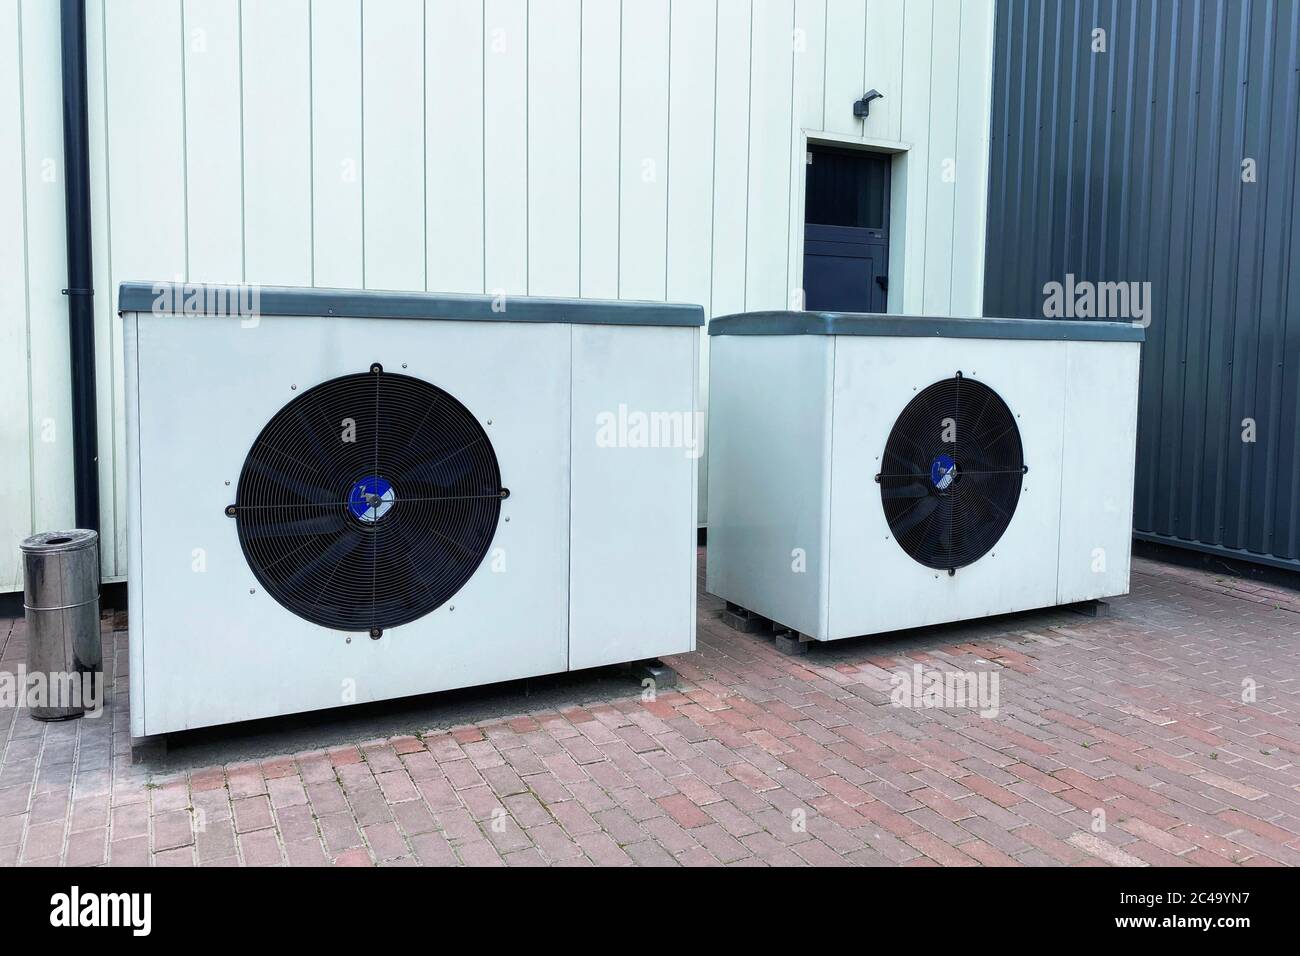 Industrial fan turbine background. Air conditioner condenser fan units battery set climate control. Refrigeration temperature conditioning system. Stock Photo